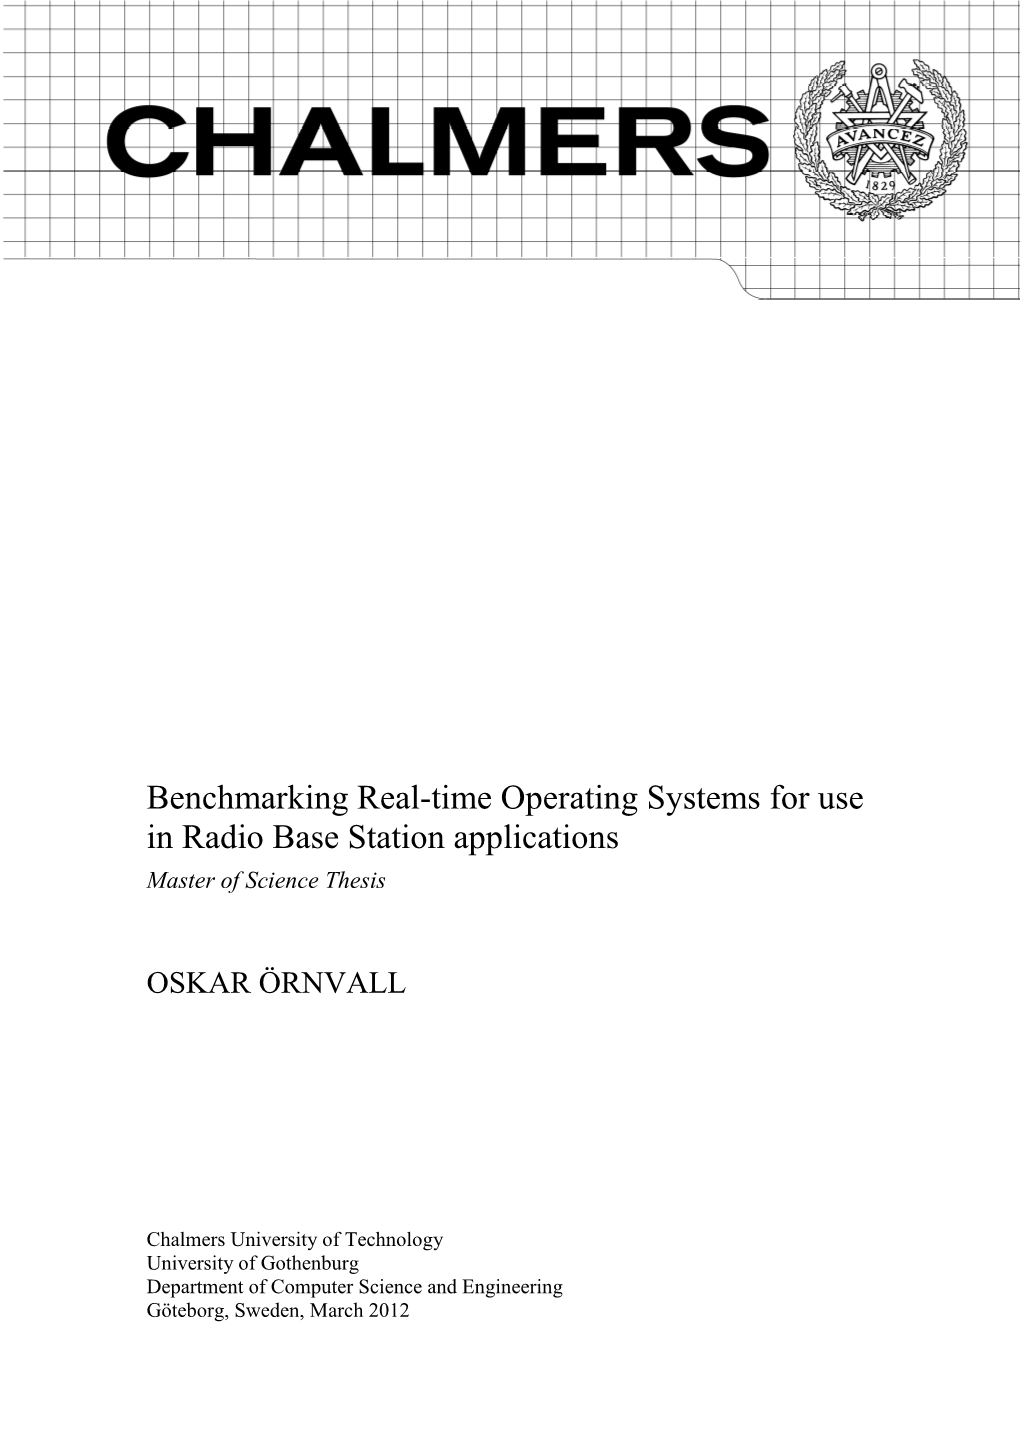 Benchmarking Real-Time Operating Systems for Use in Radio Base Station Applications Master of Science Thesis